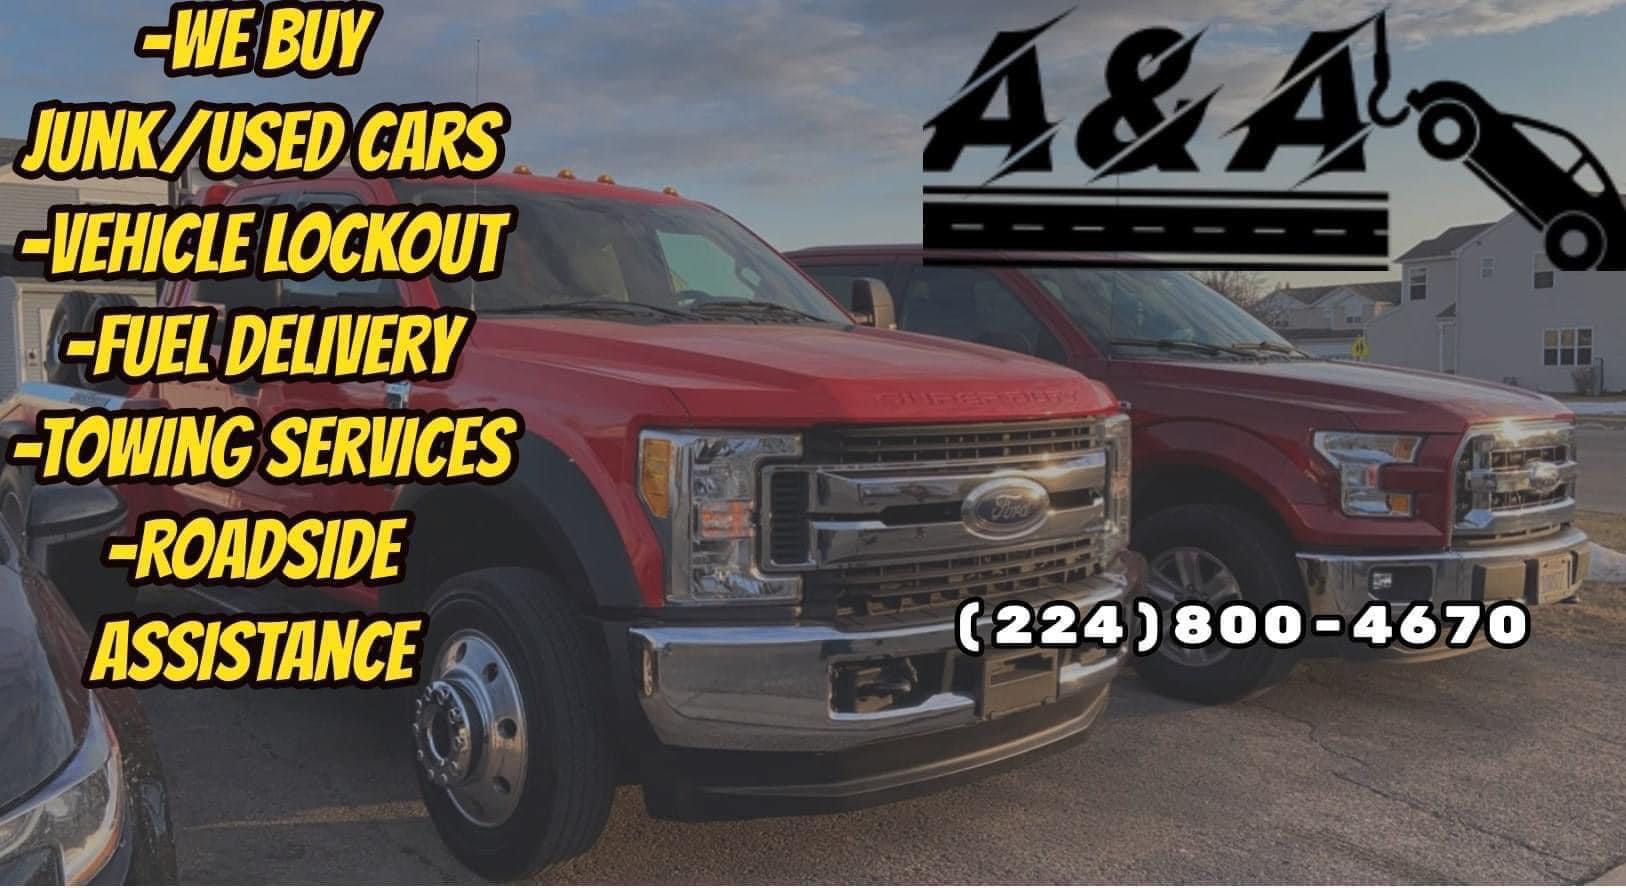 A&A Towing 24/7 Service